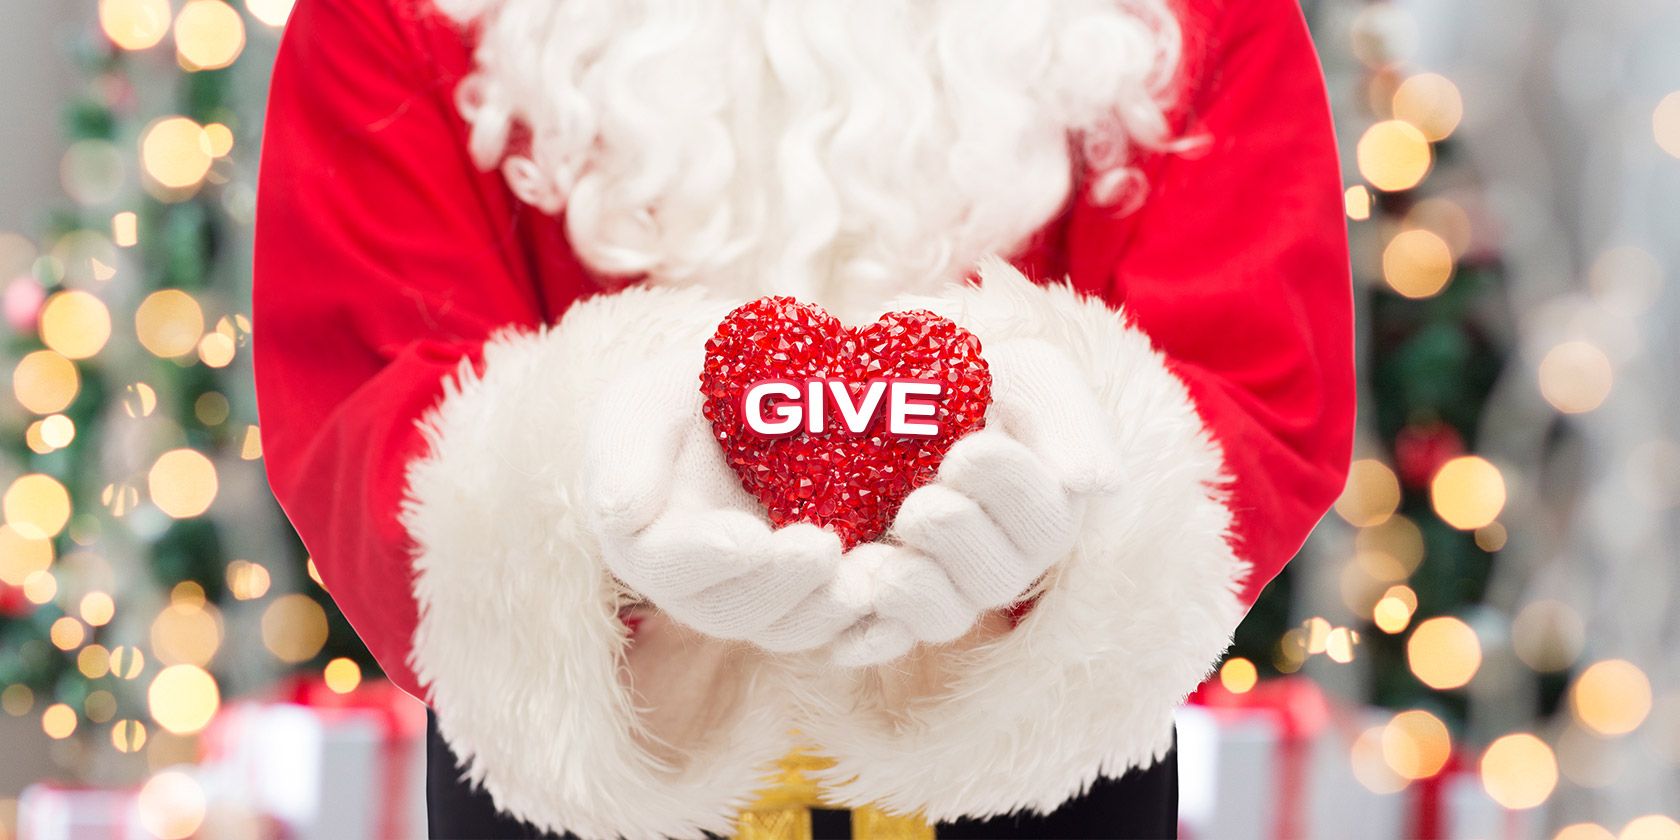 christmas assistance programs list 2020 ct Top 7 Christmas Charity Organizations That Help Low Income Families christmas assistance programs list 2020 ct